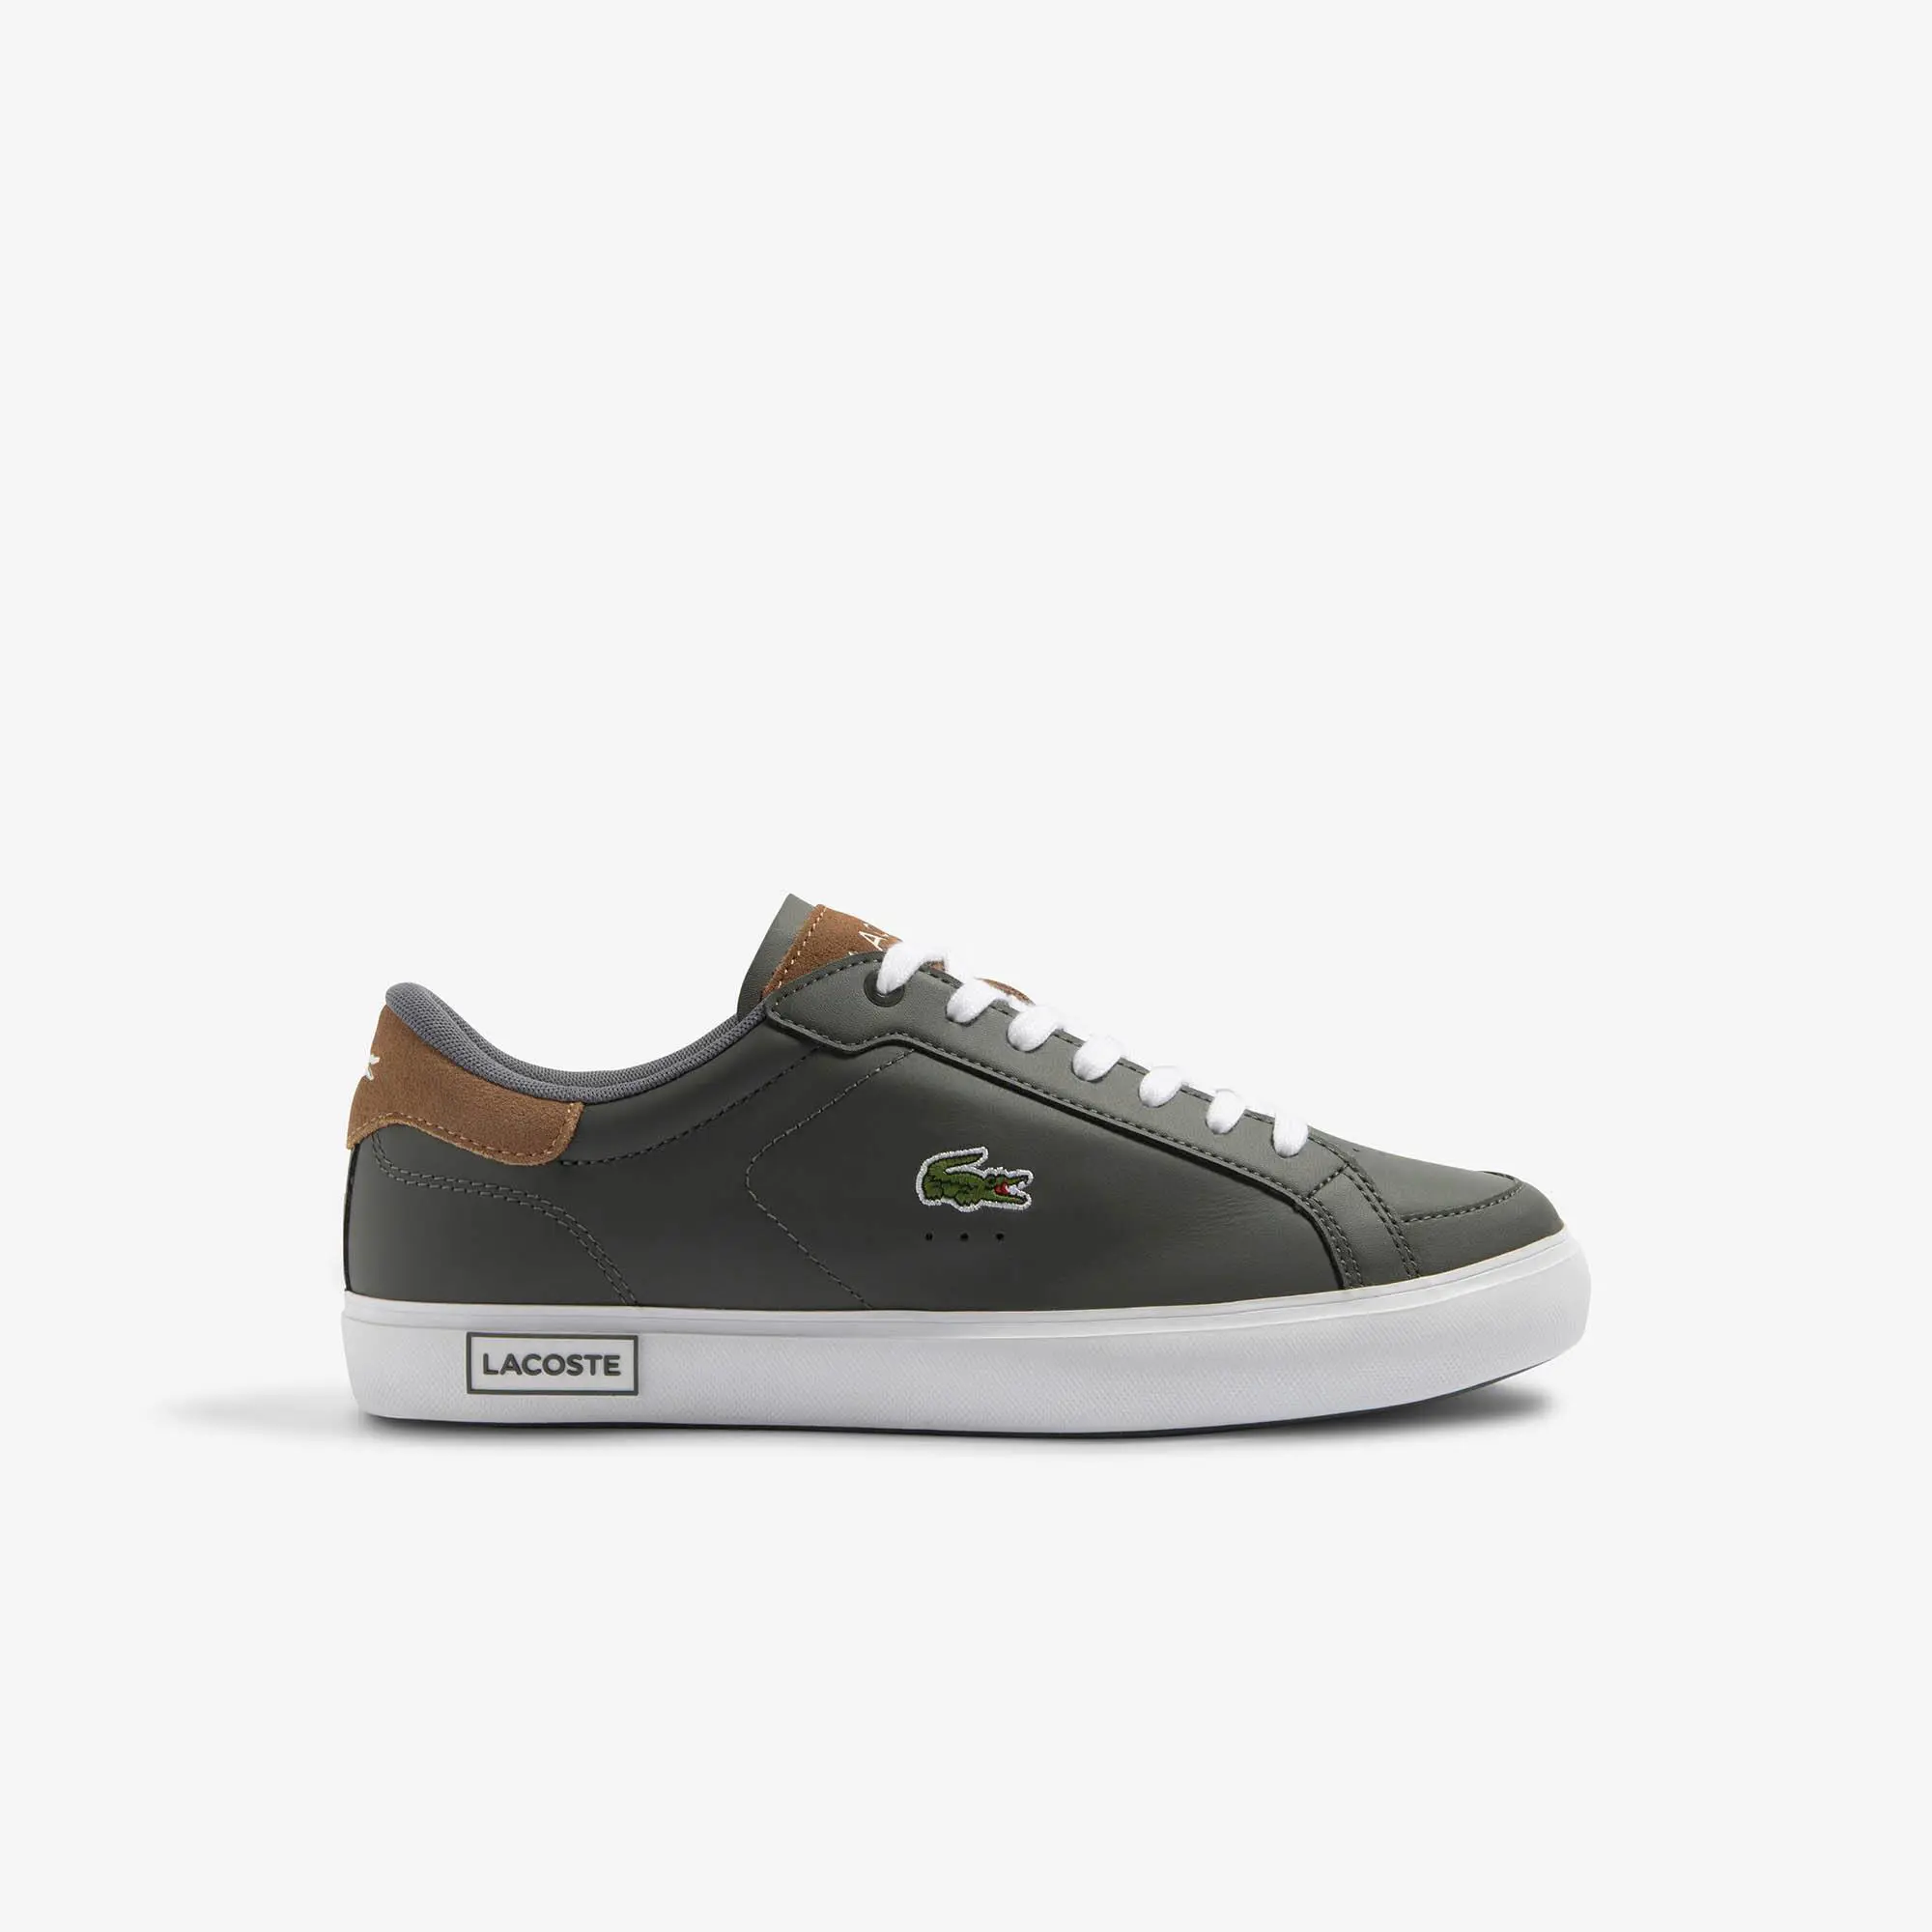 Lacoste Men's Powercourt Leather Trainers. 1